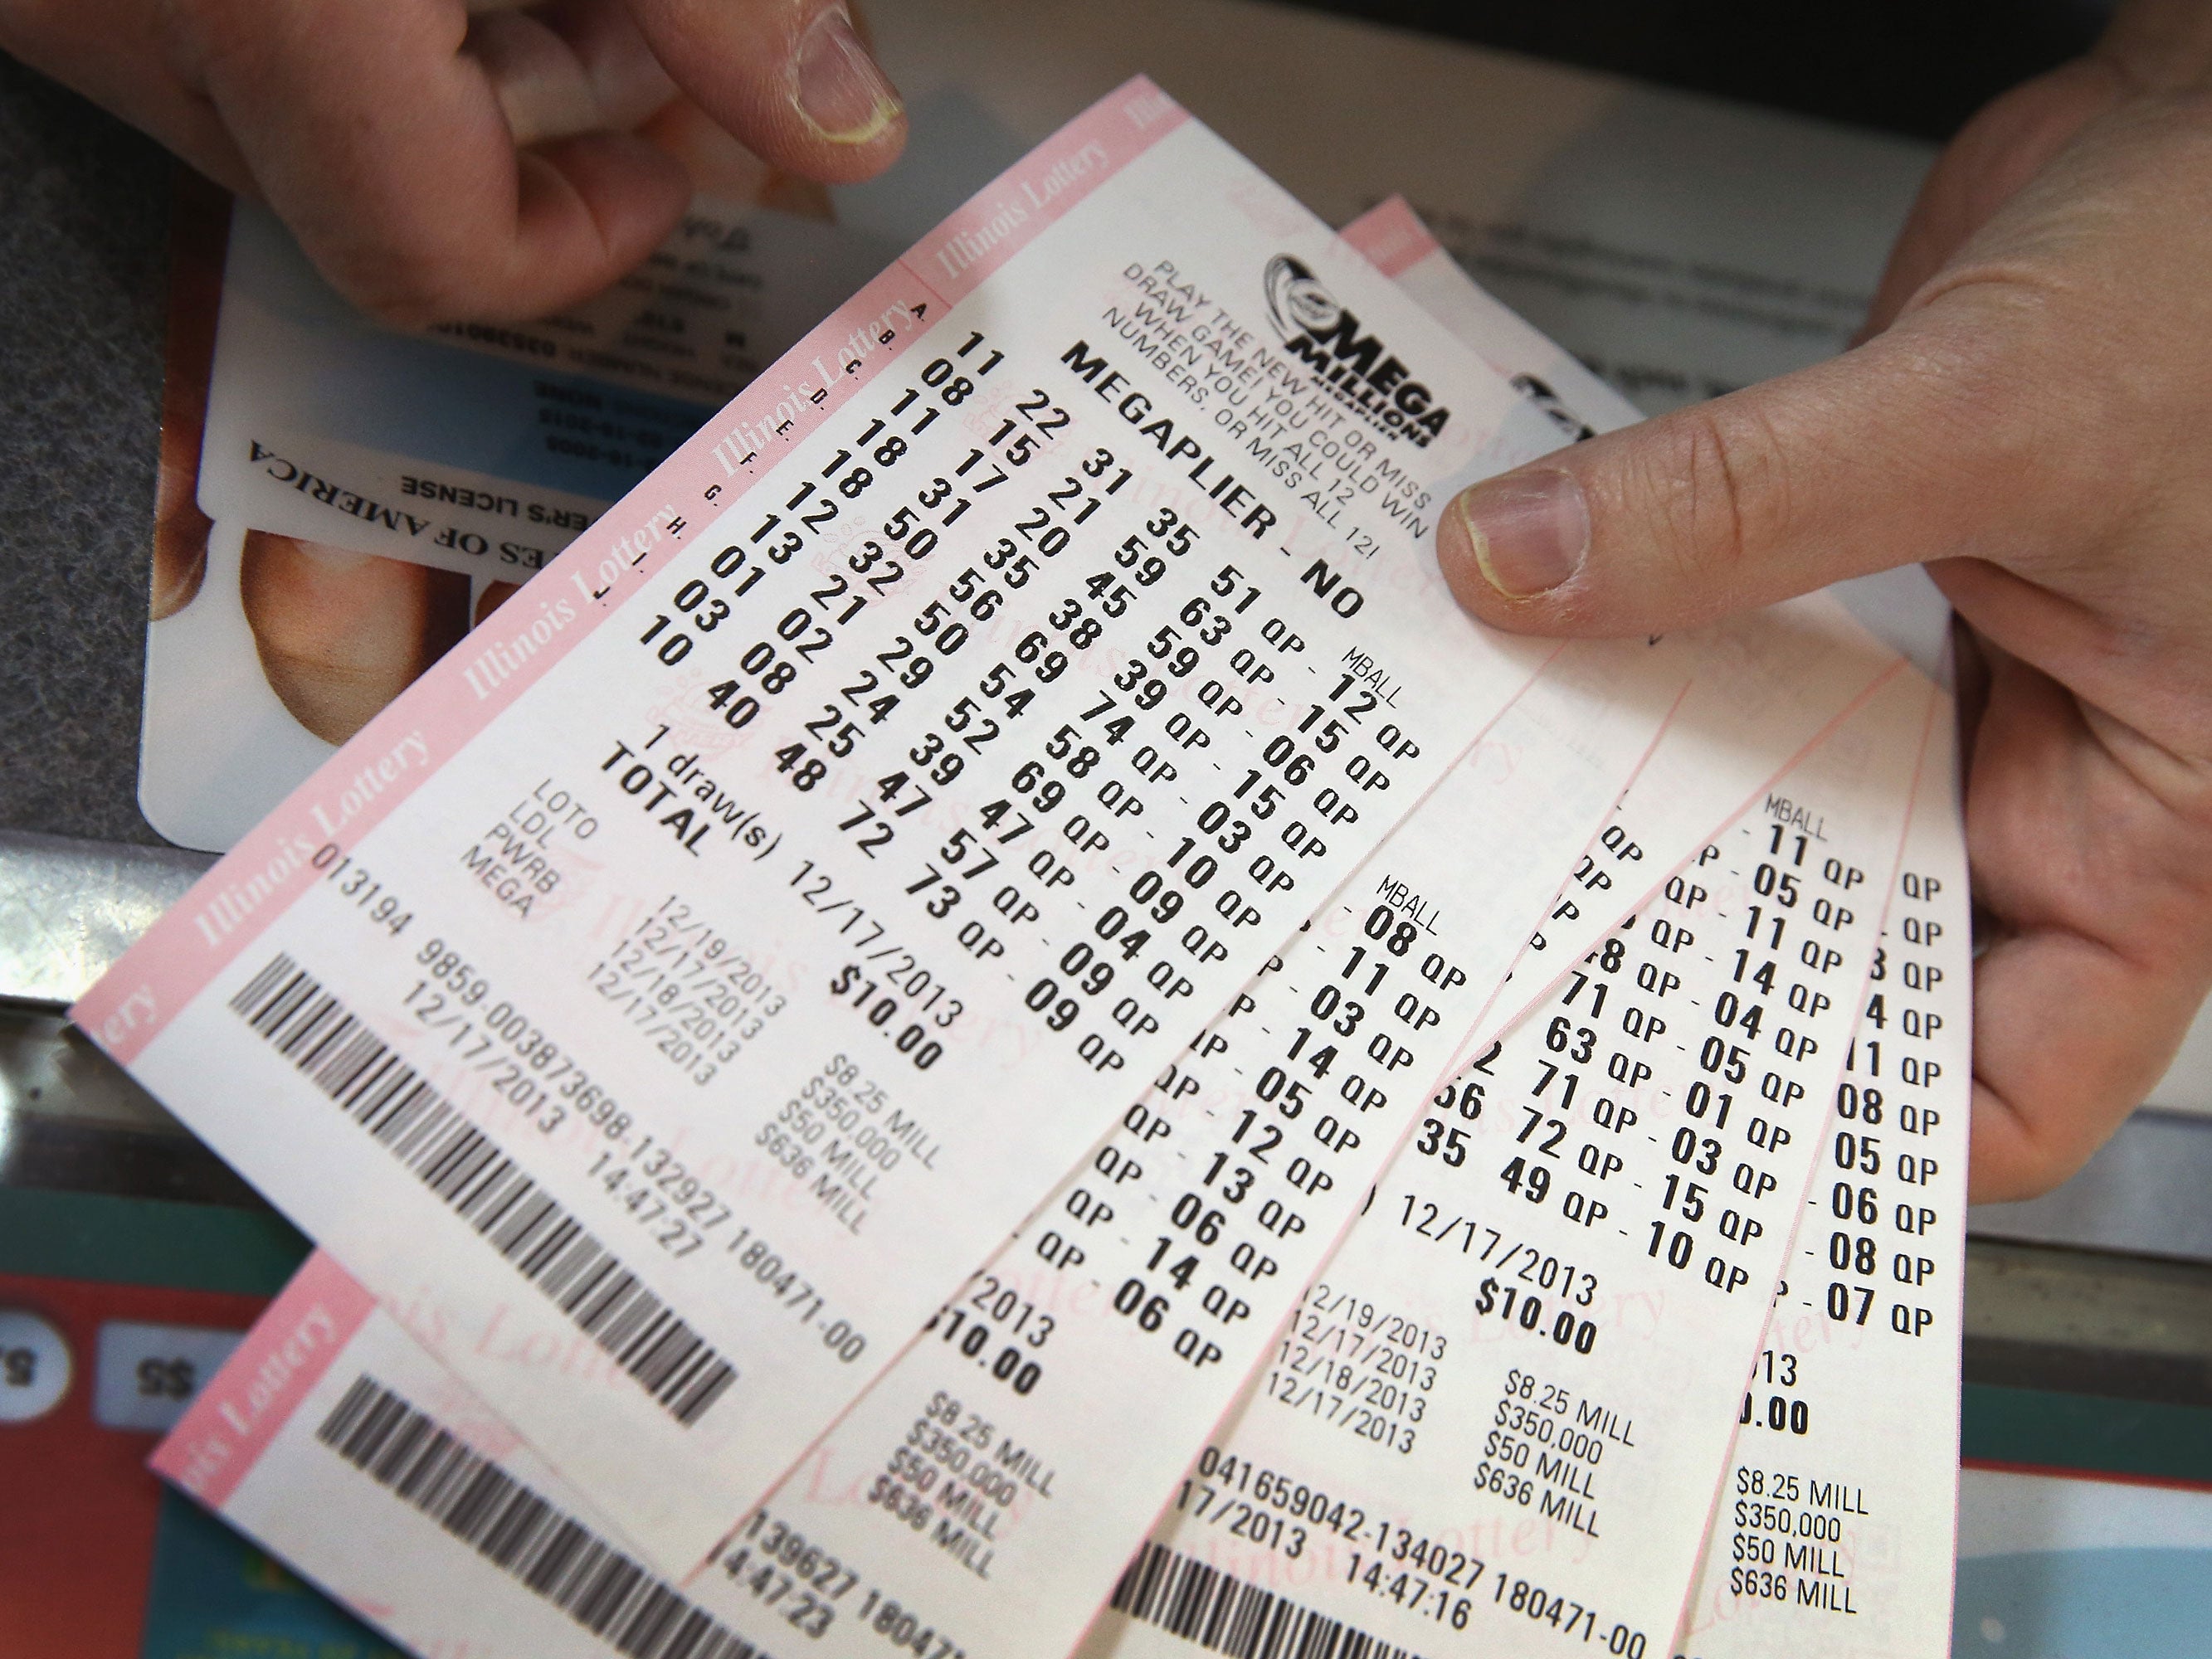 A customer holds a stack of Mega Millions lottery tickets which he purchased for his office pool at a convenience store on December 17, 2013 in Chicago, Illinois.